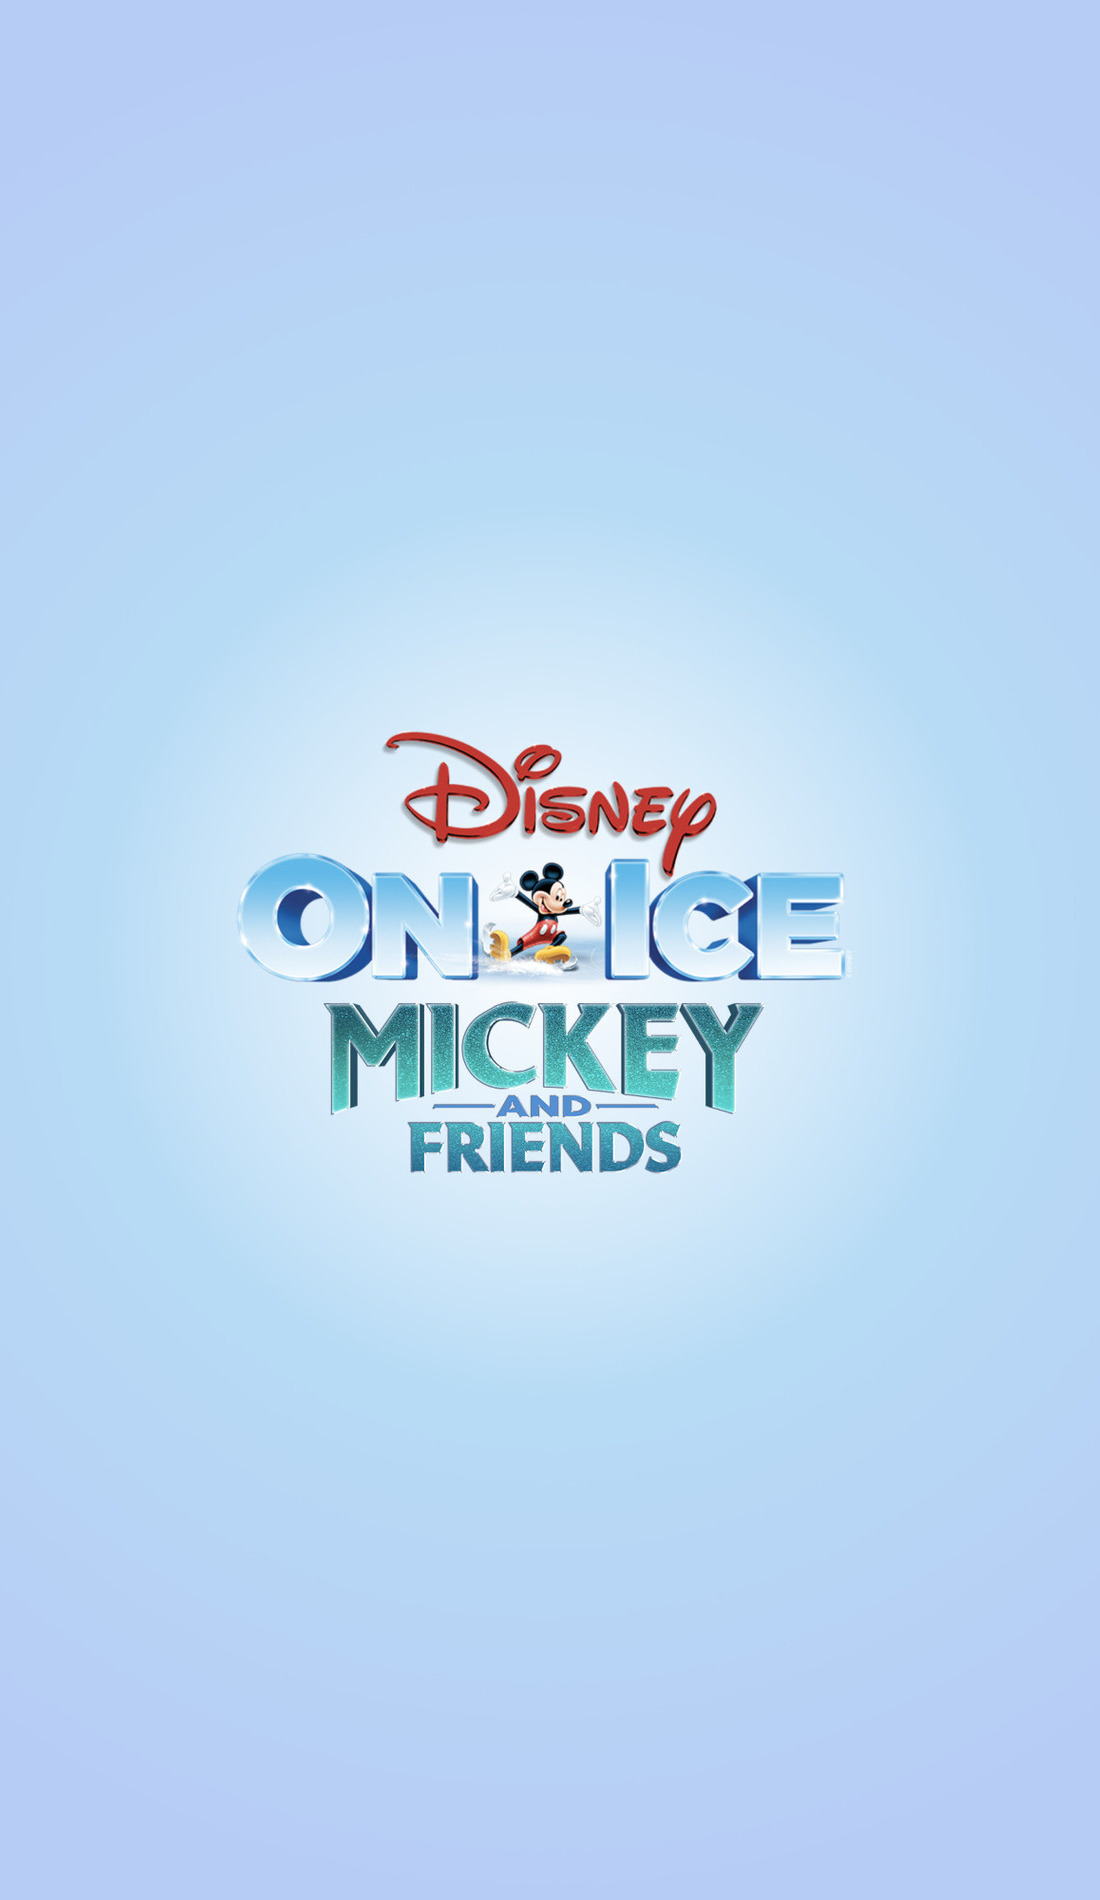 A Disney On Ice presents Mickey and Friends live event